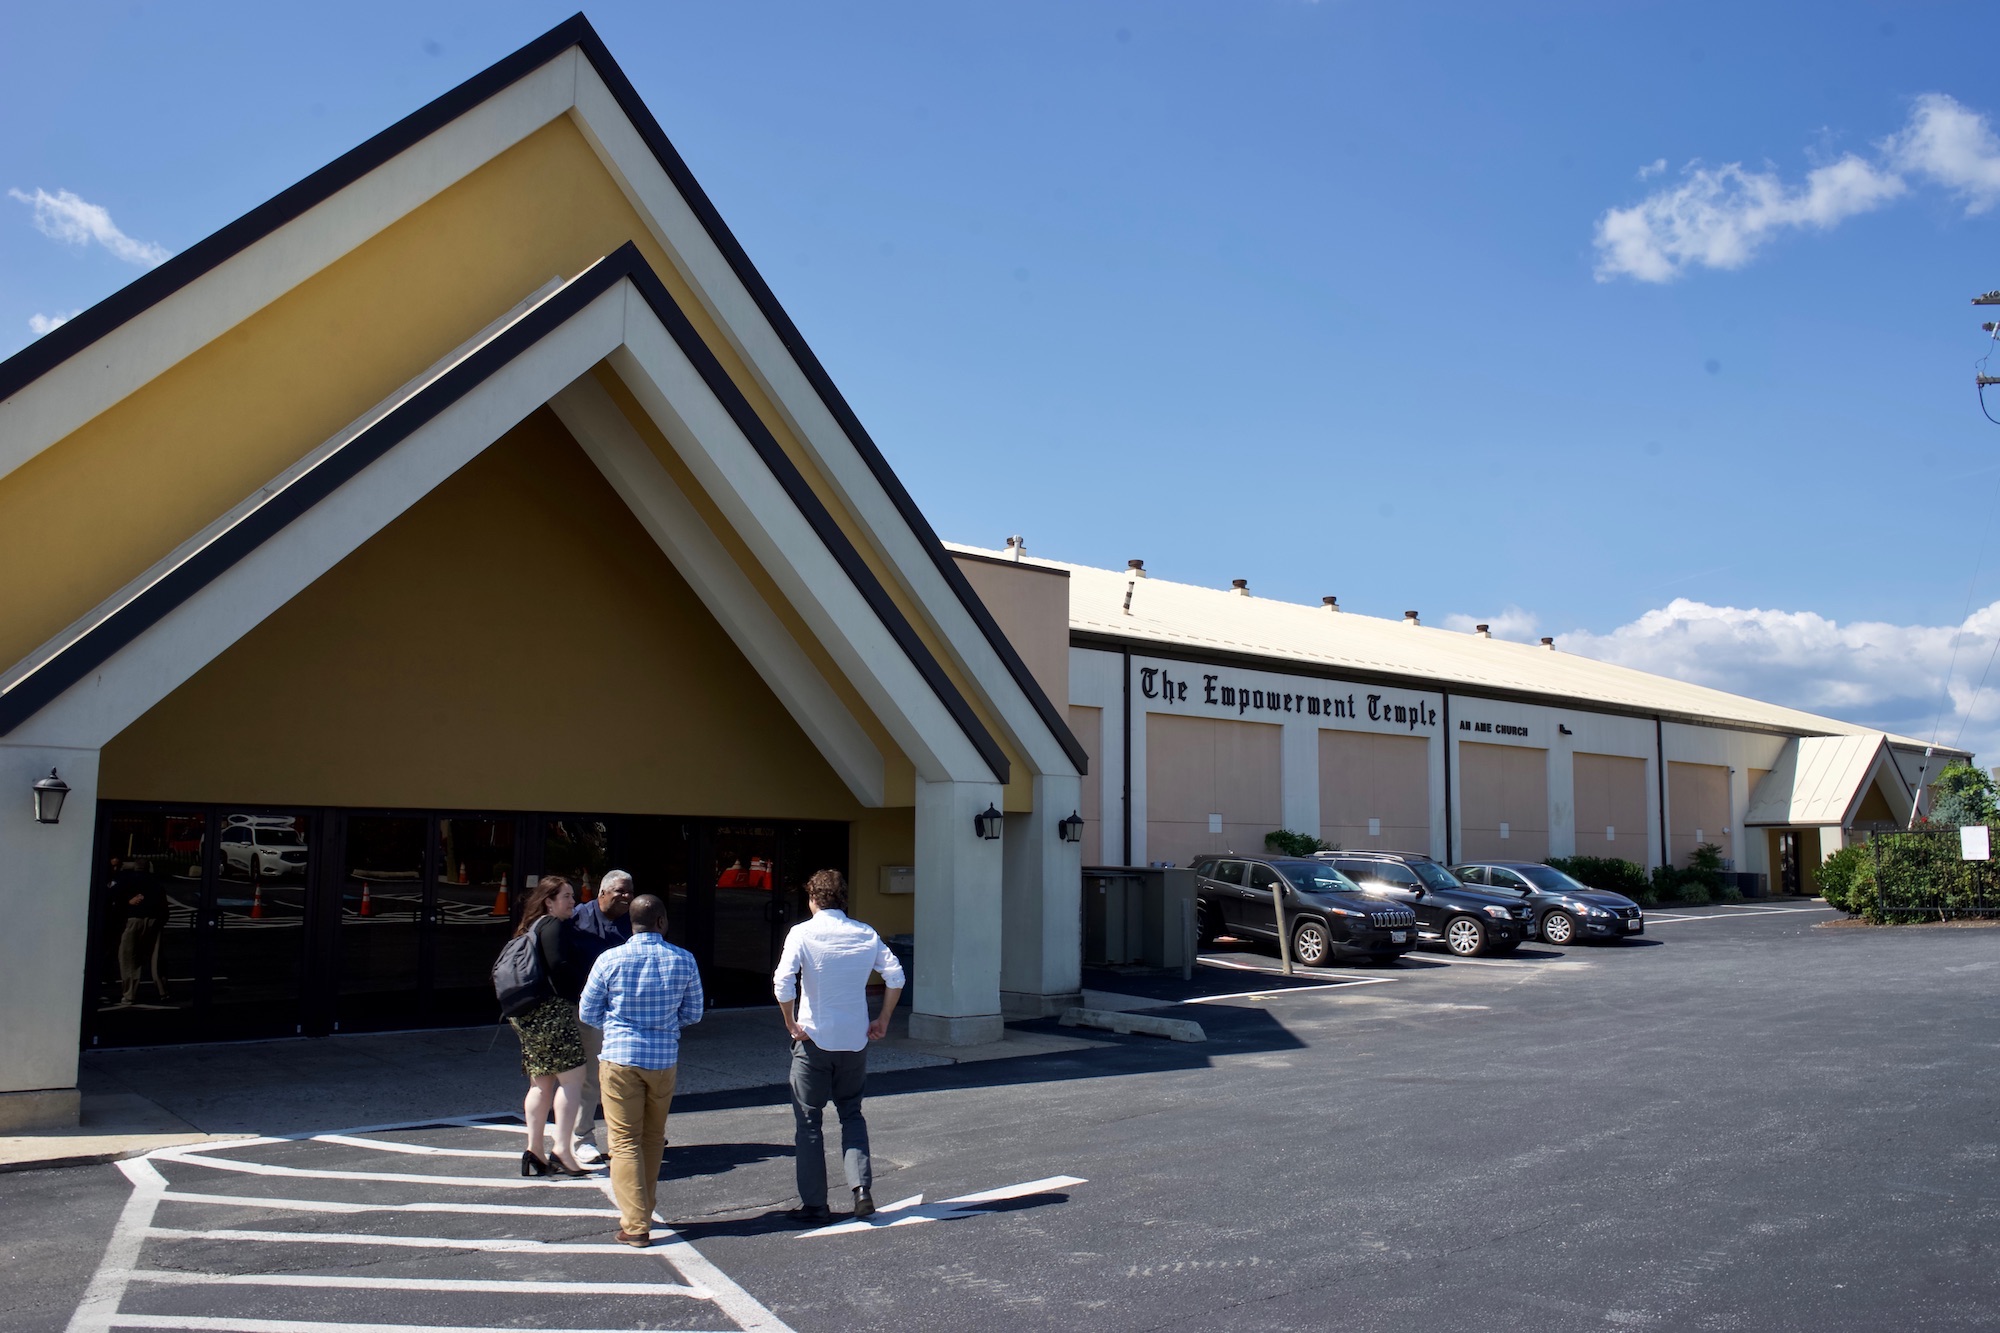 A large angled arch of a building in front of a large parking lot. On the body of the building it reads 